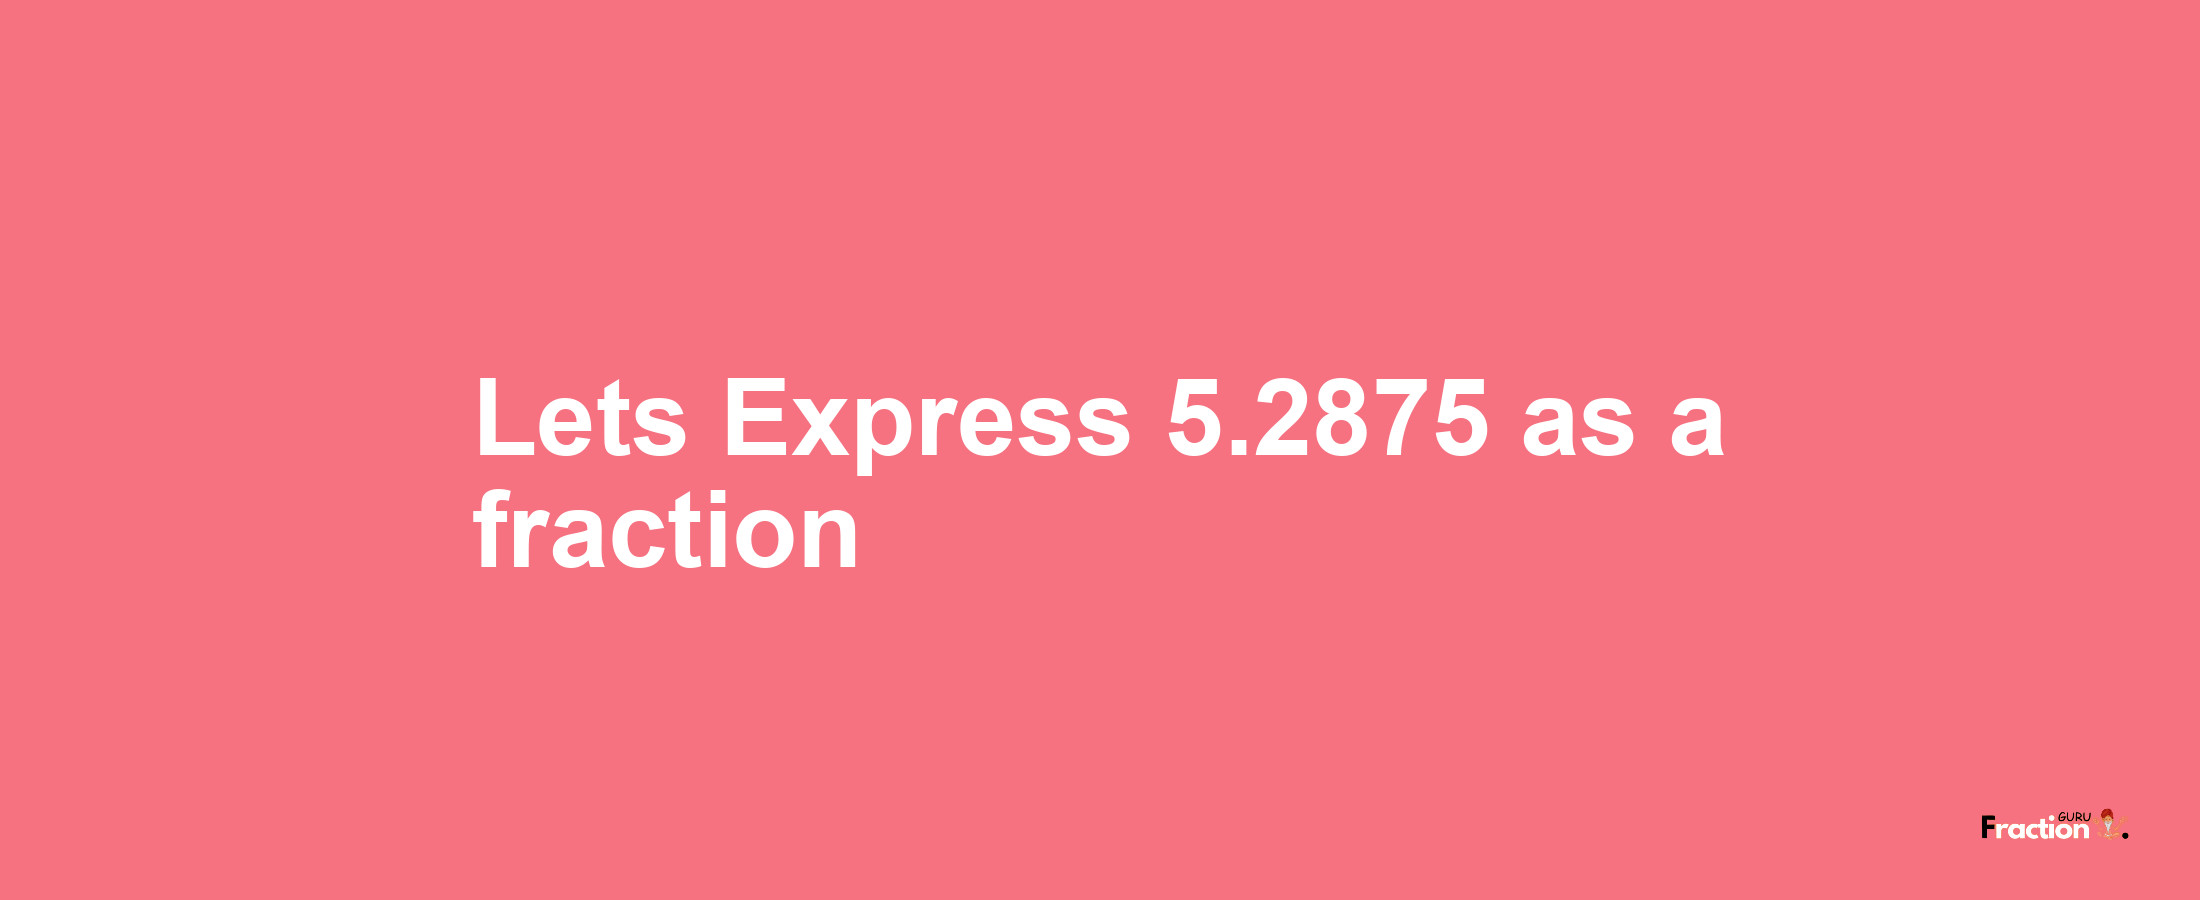 Lets Express 5.2875 as afraction